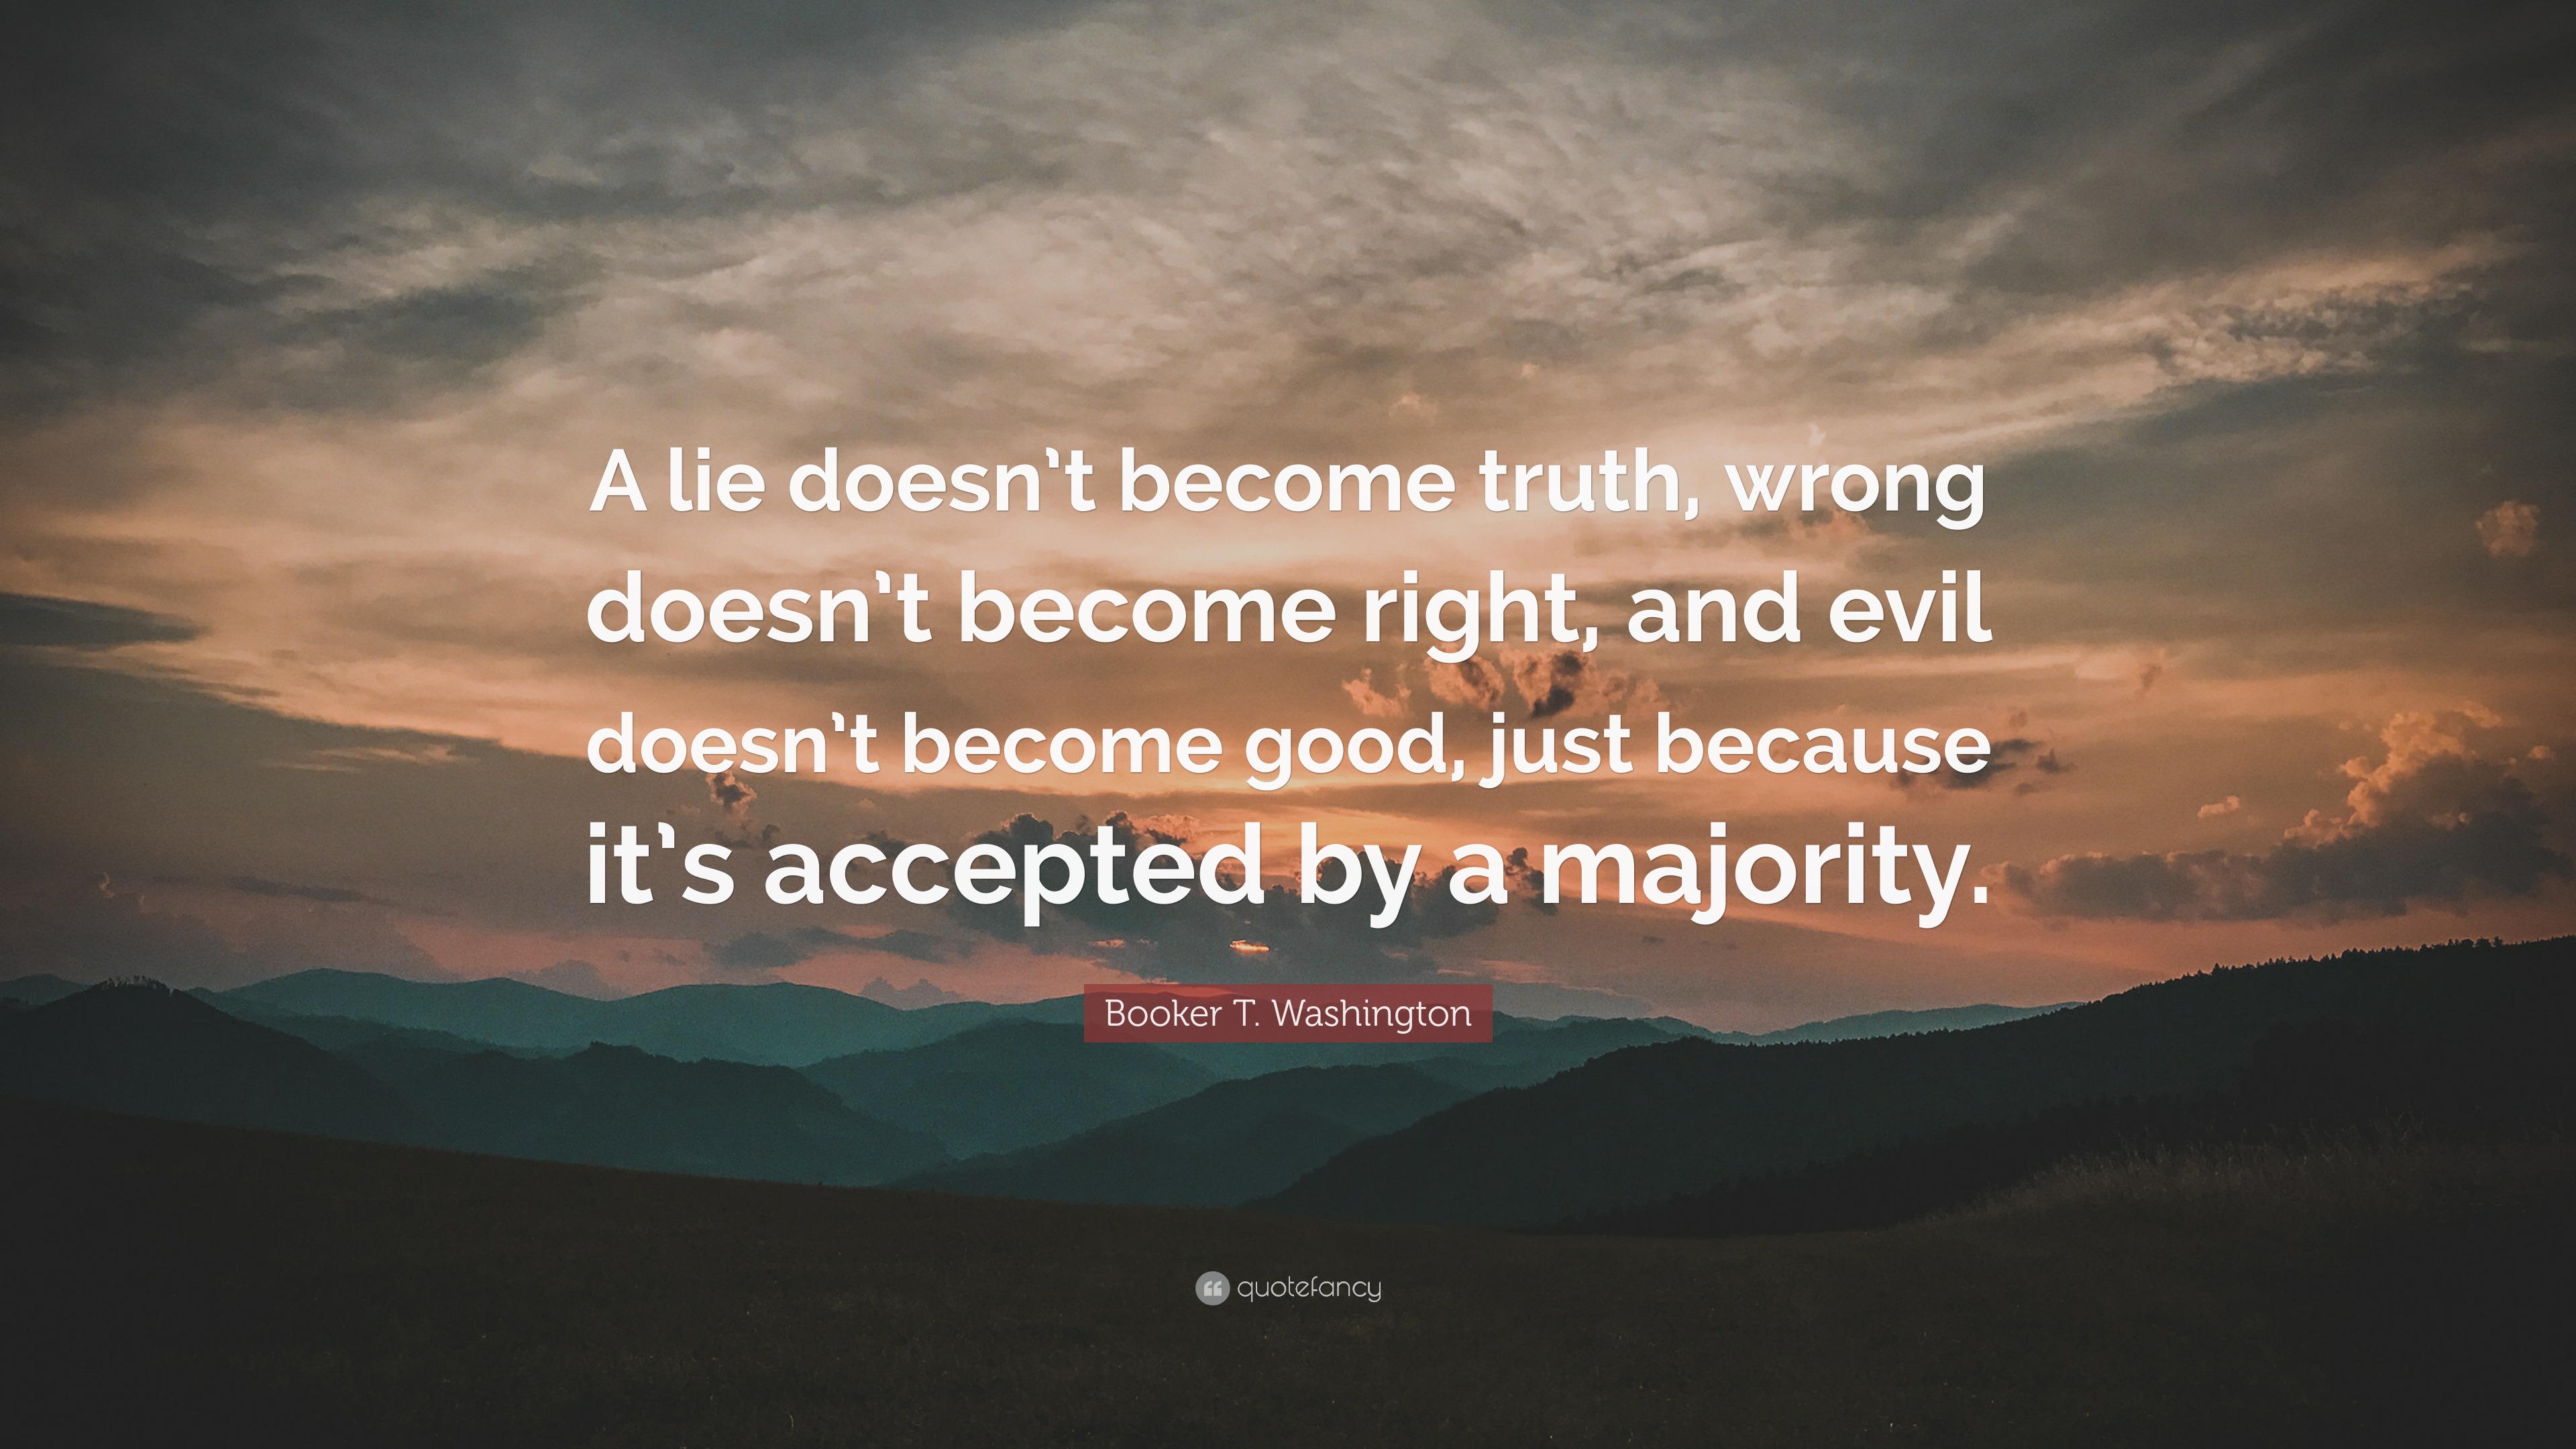 Booker T Washington Quote A Lie Doesn T Become Truth Wrong Doesn T Become Right And Evil Doesn T Become Good Just Because It S Accepted By A Ma